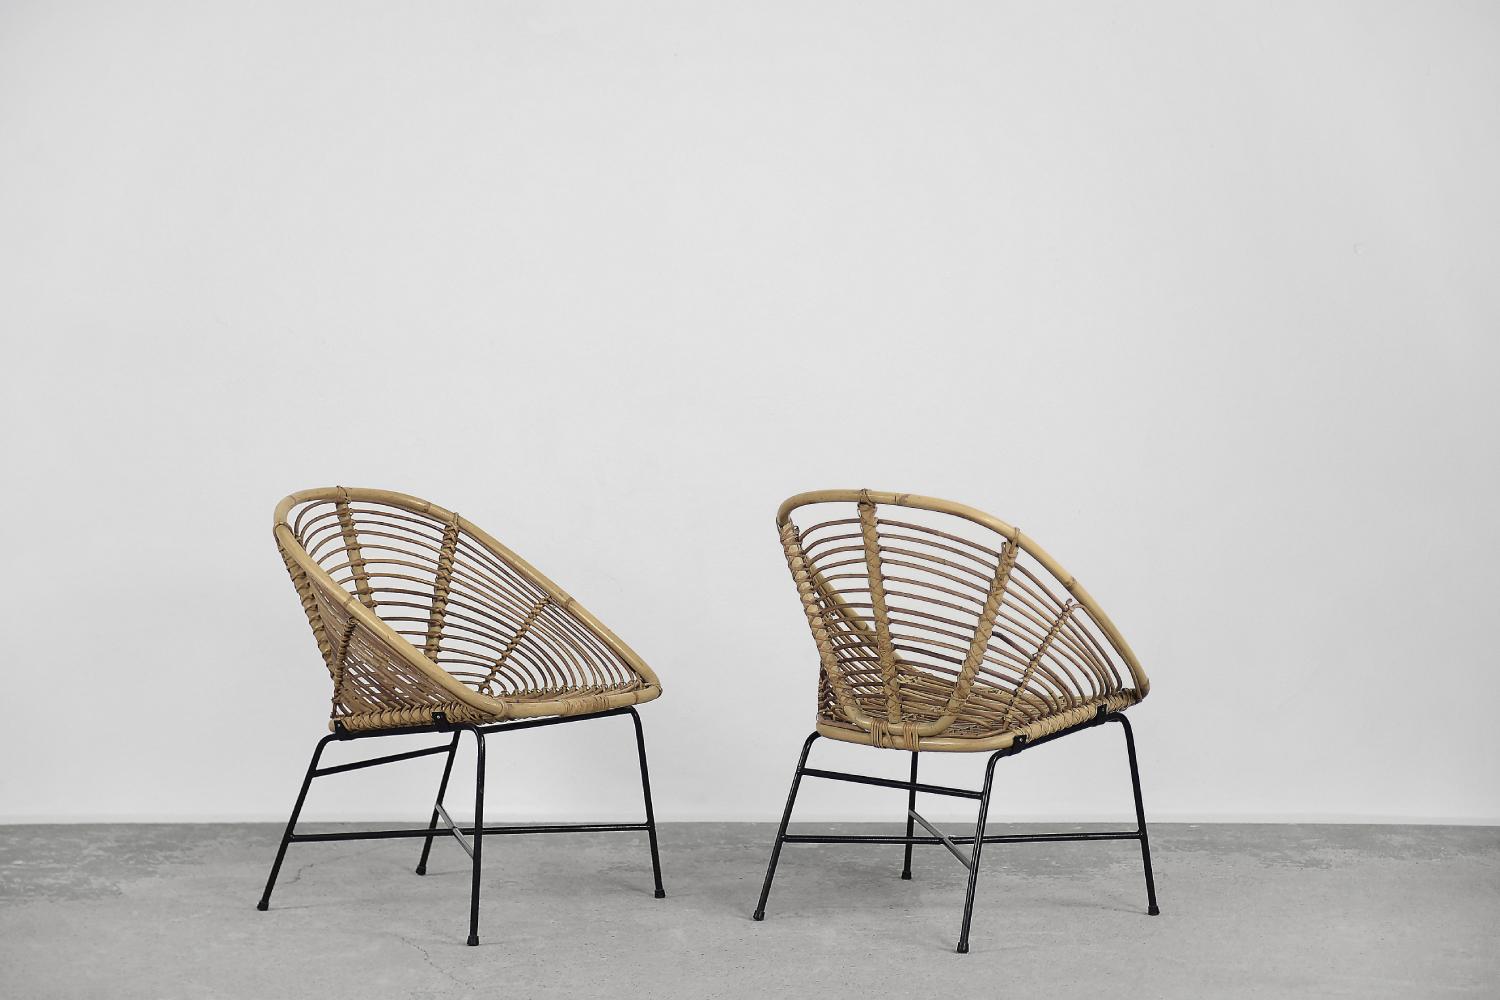 This set of two vintage armchairs was produced during the 1960s. The frame was made of black metal, and the bucket-shaped seat was woven with natural bamboo.

The armchairs are in original vintage condition. They have minor traces of age and wear.